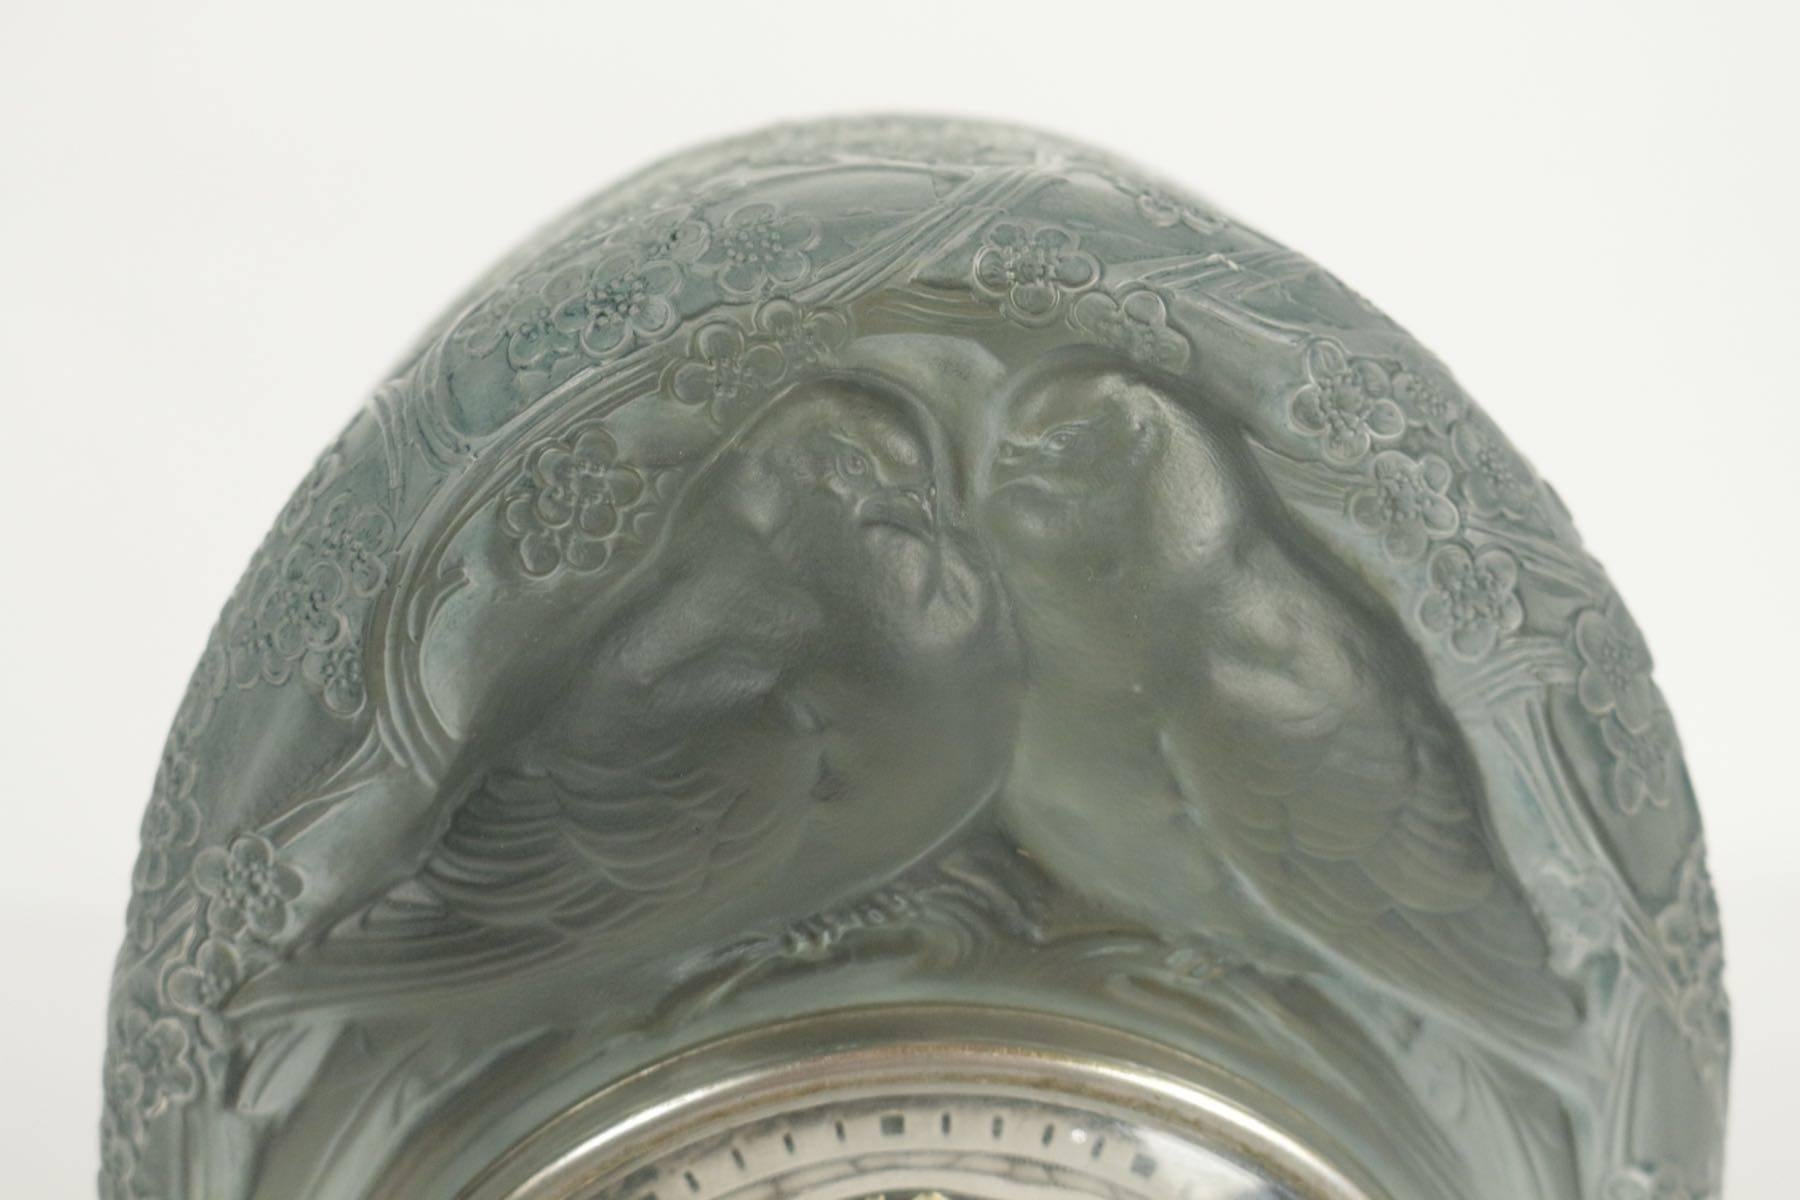 Deux colombes, a moulded-pressed satiny glass mile-stone clock with a Maison ATO milestone dial and new battery.
Two perched birds on branches and foilage motif under a dome shaped.
Signed R.Lalique France.
Model created in 1926.
Measures: H: 8